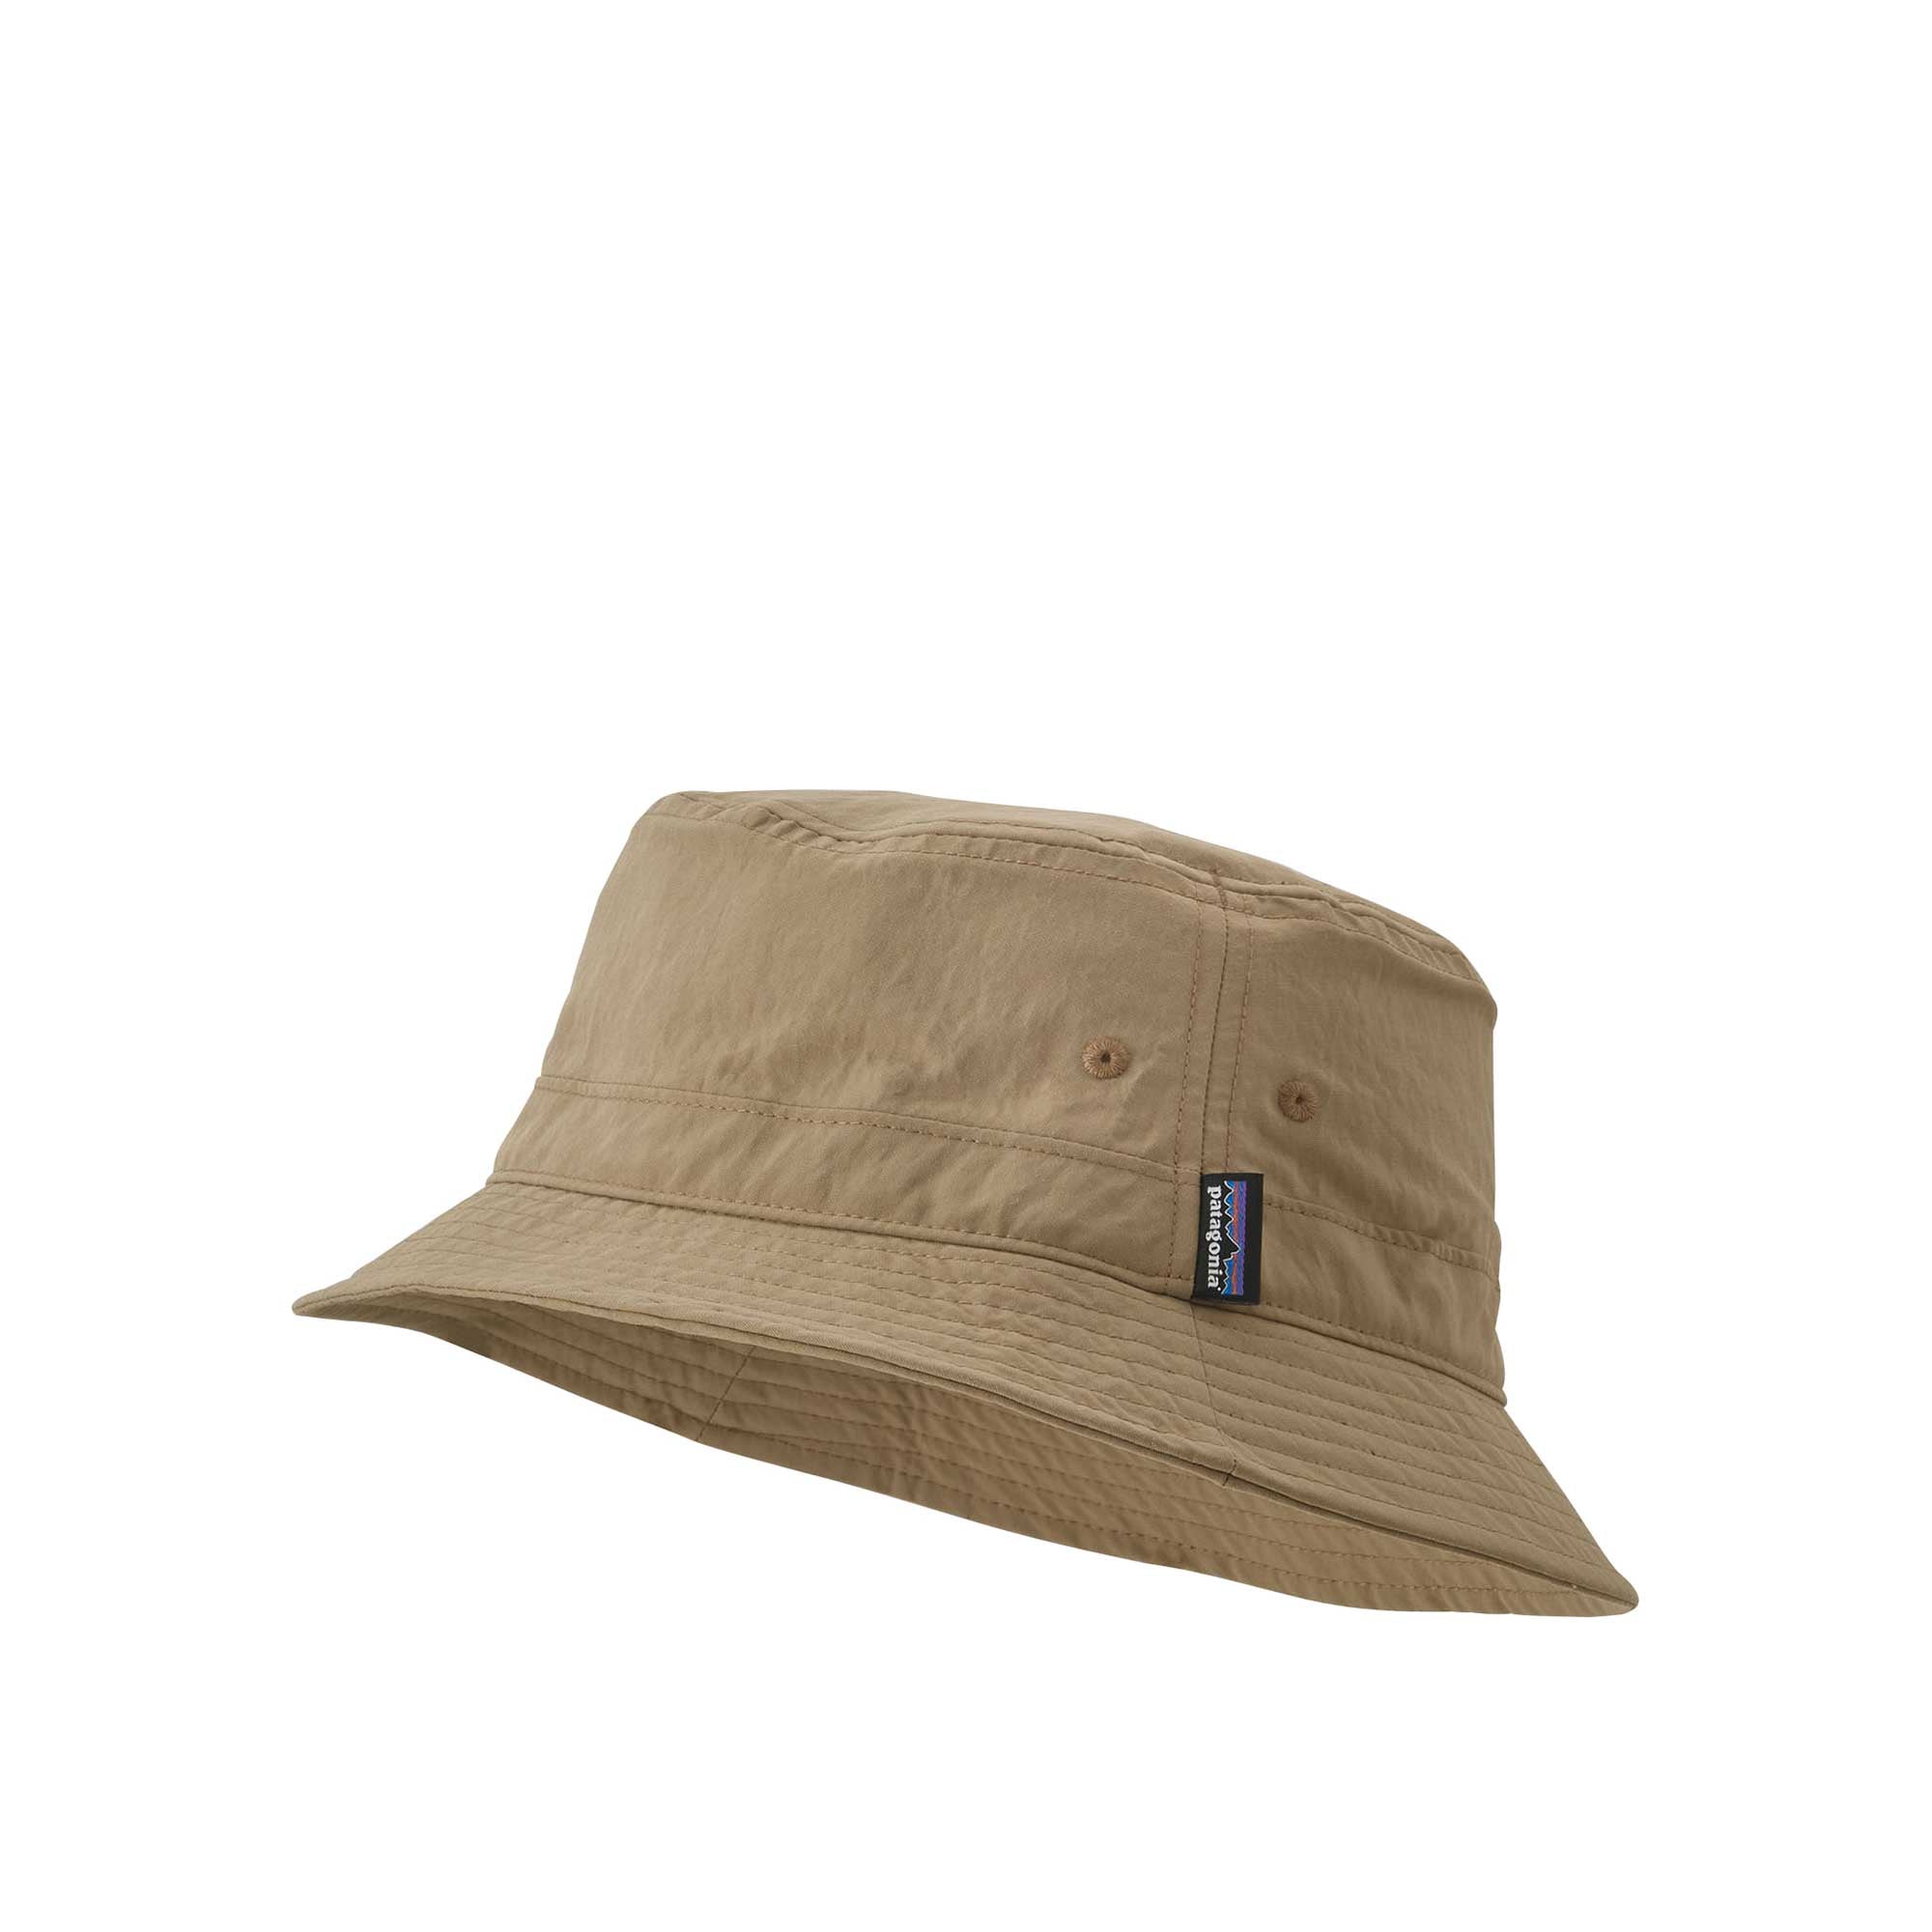 Patagonia Maclure Hat, Forge Mark Crest: Anacapa Blue